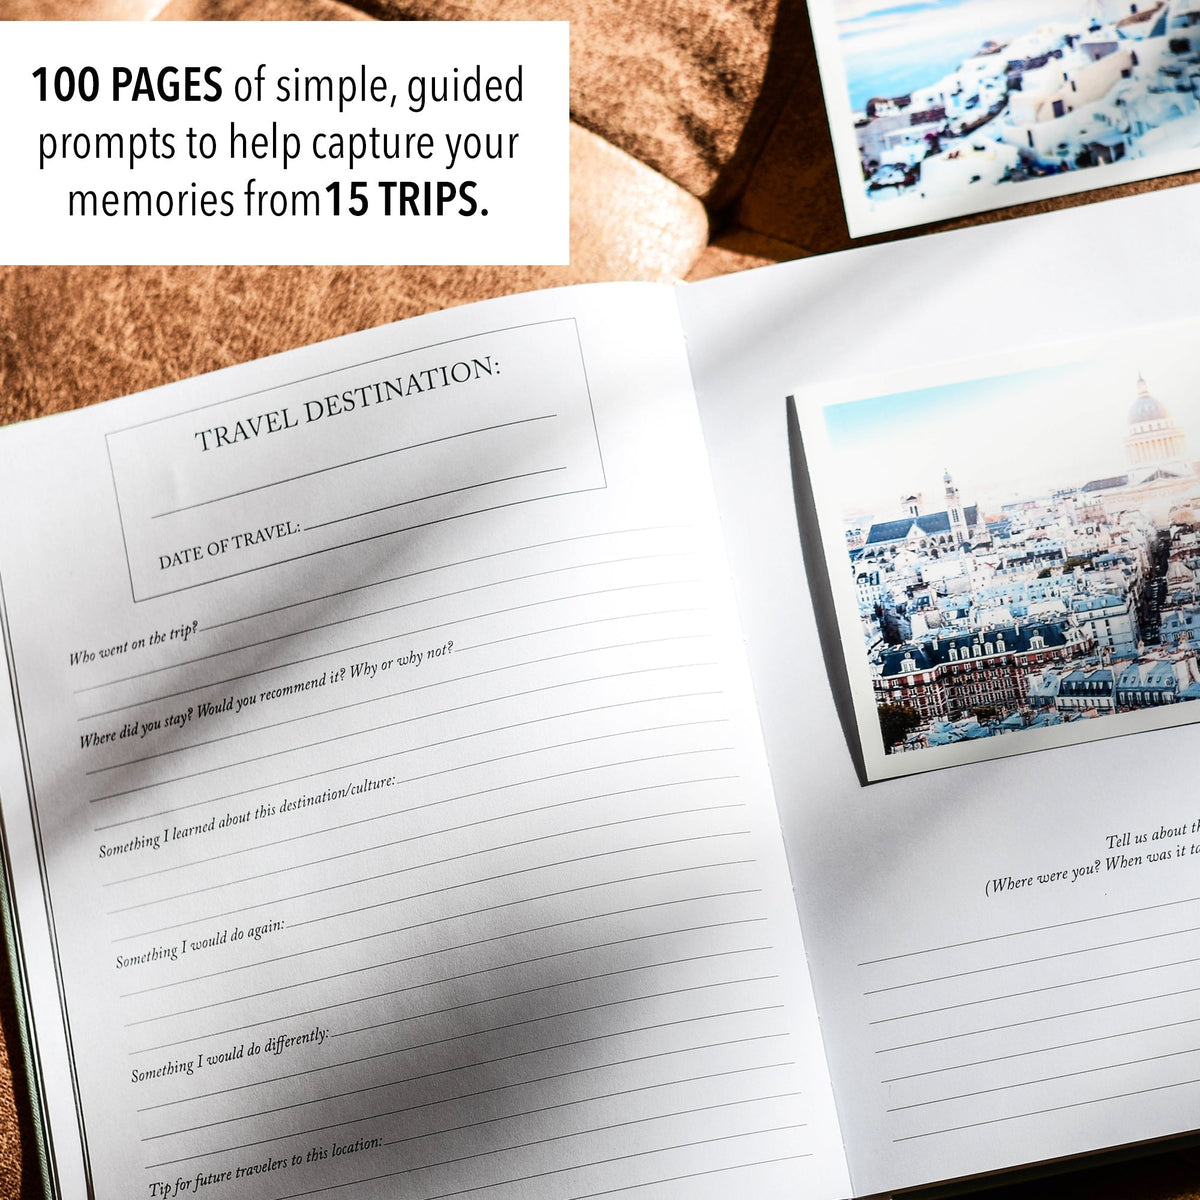 Photo Journal With Writing Space: Memory Scrapbook for Photos and Writing  With Date And Location, Travel Photo Journal. by Publication, SBB Press 